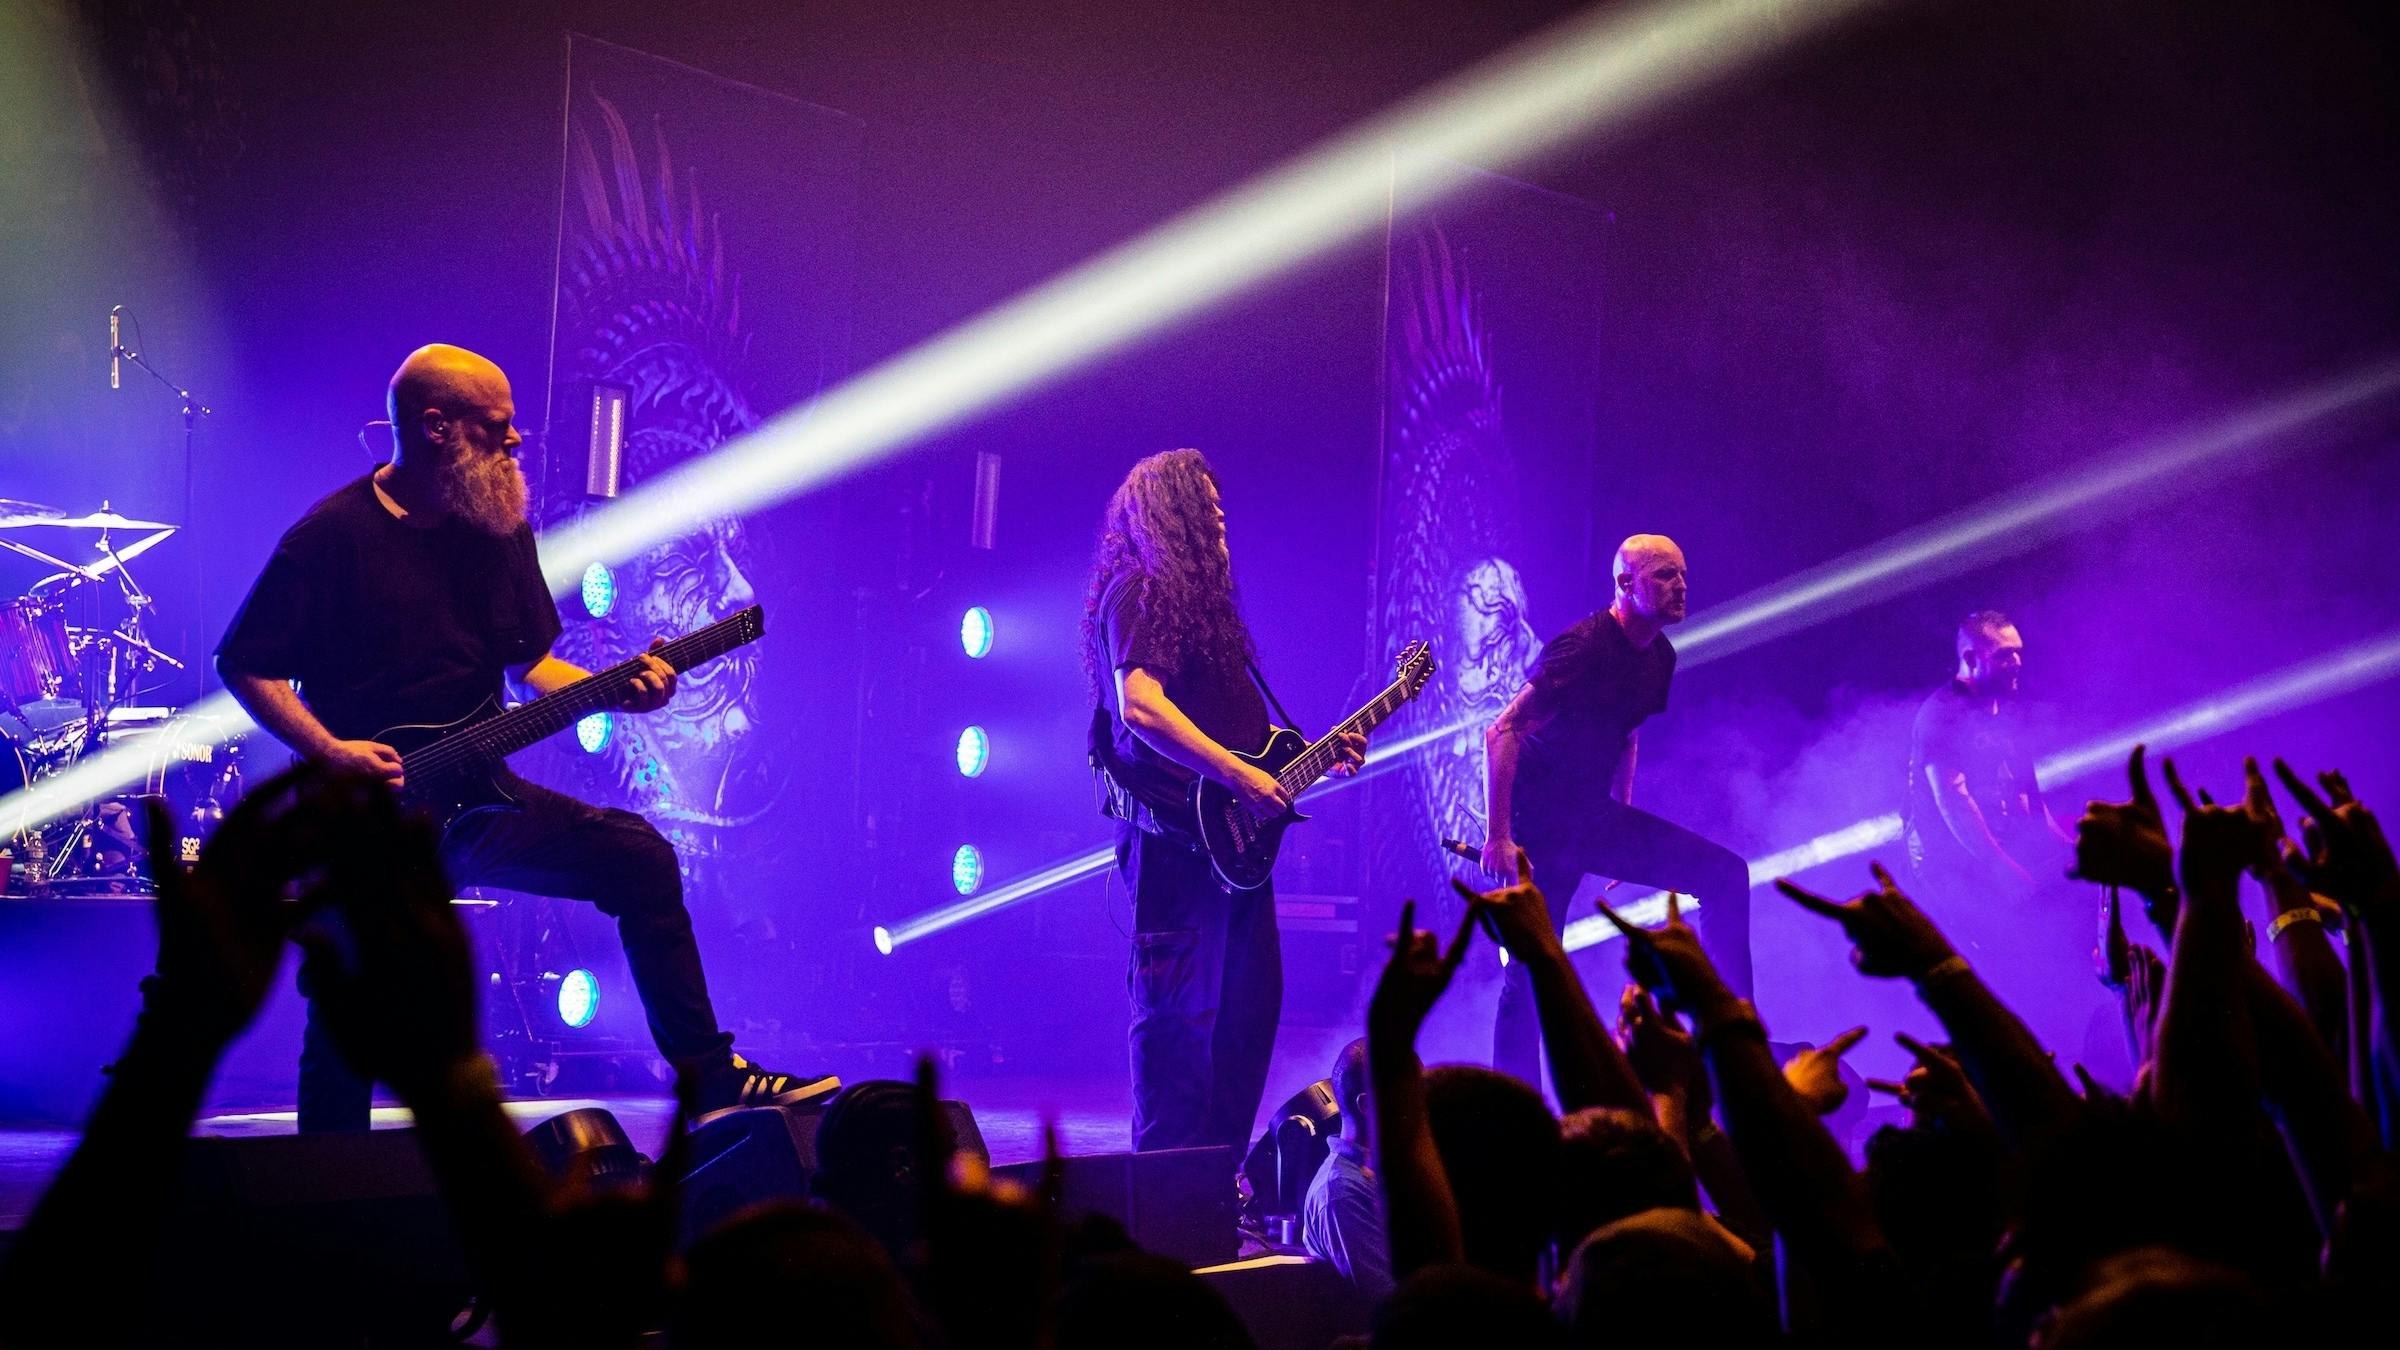 Meshuggah Are Easily One Of The Most Exciting Live Metal Bands In The World